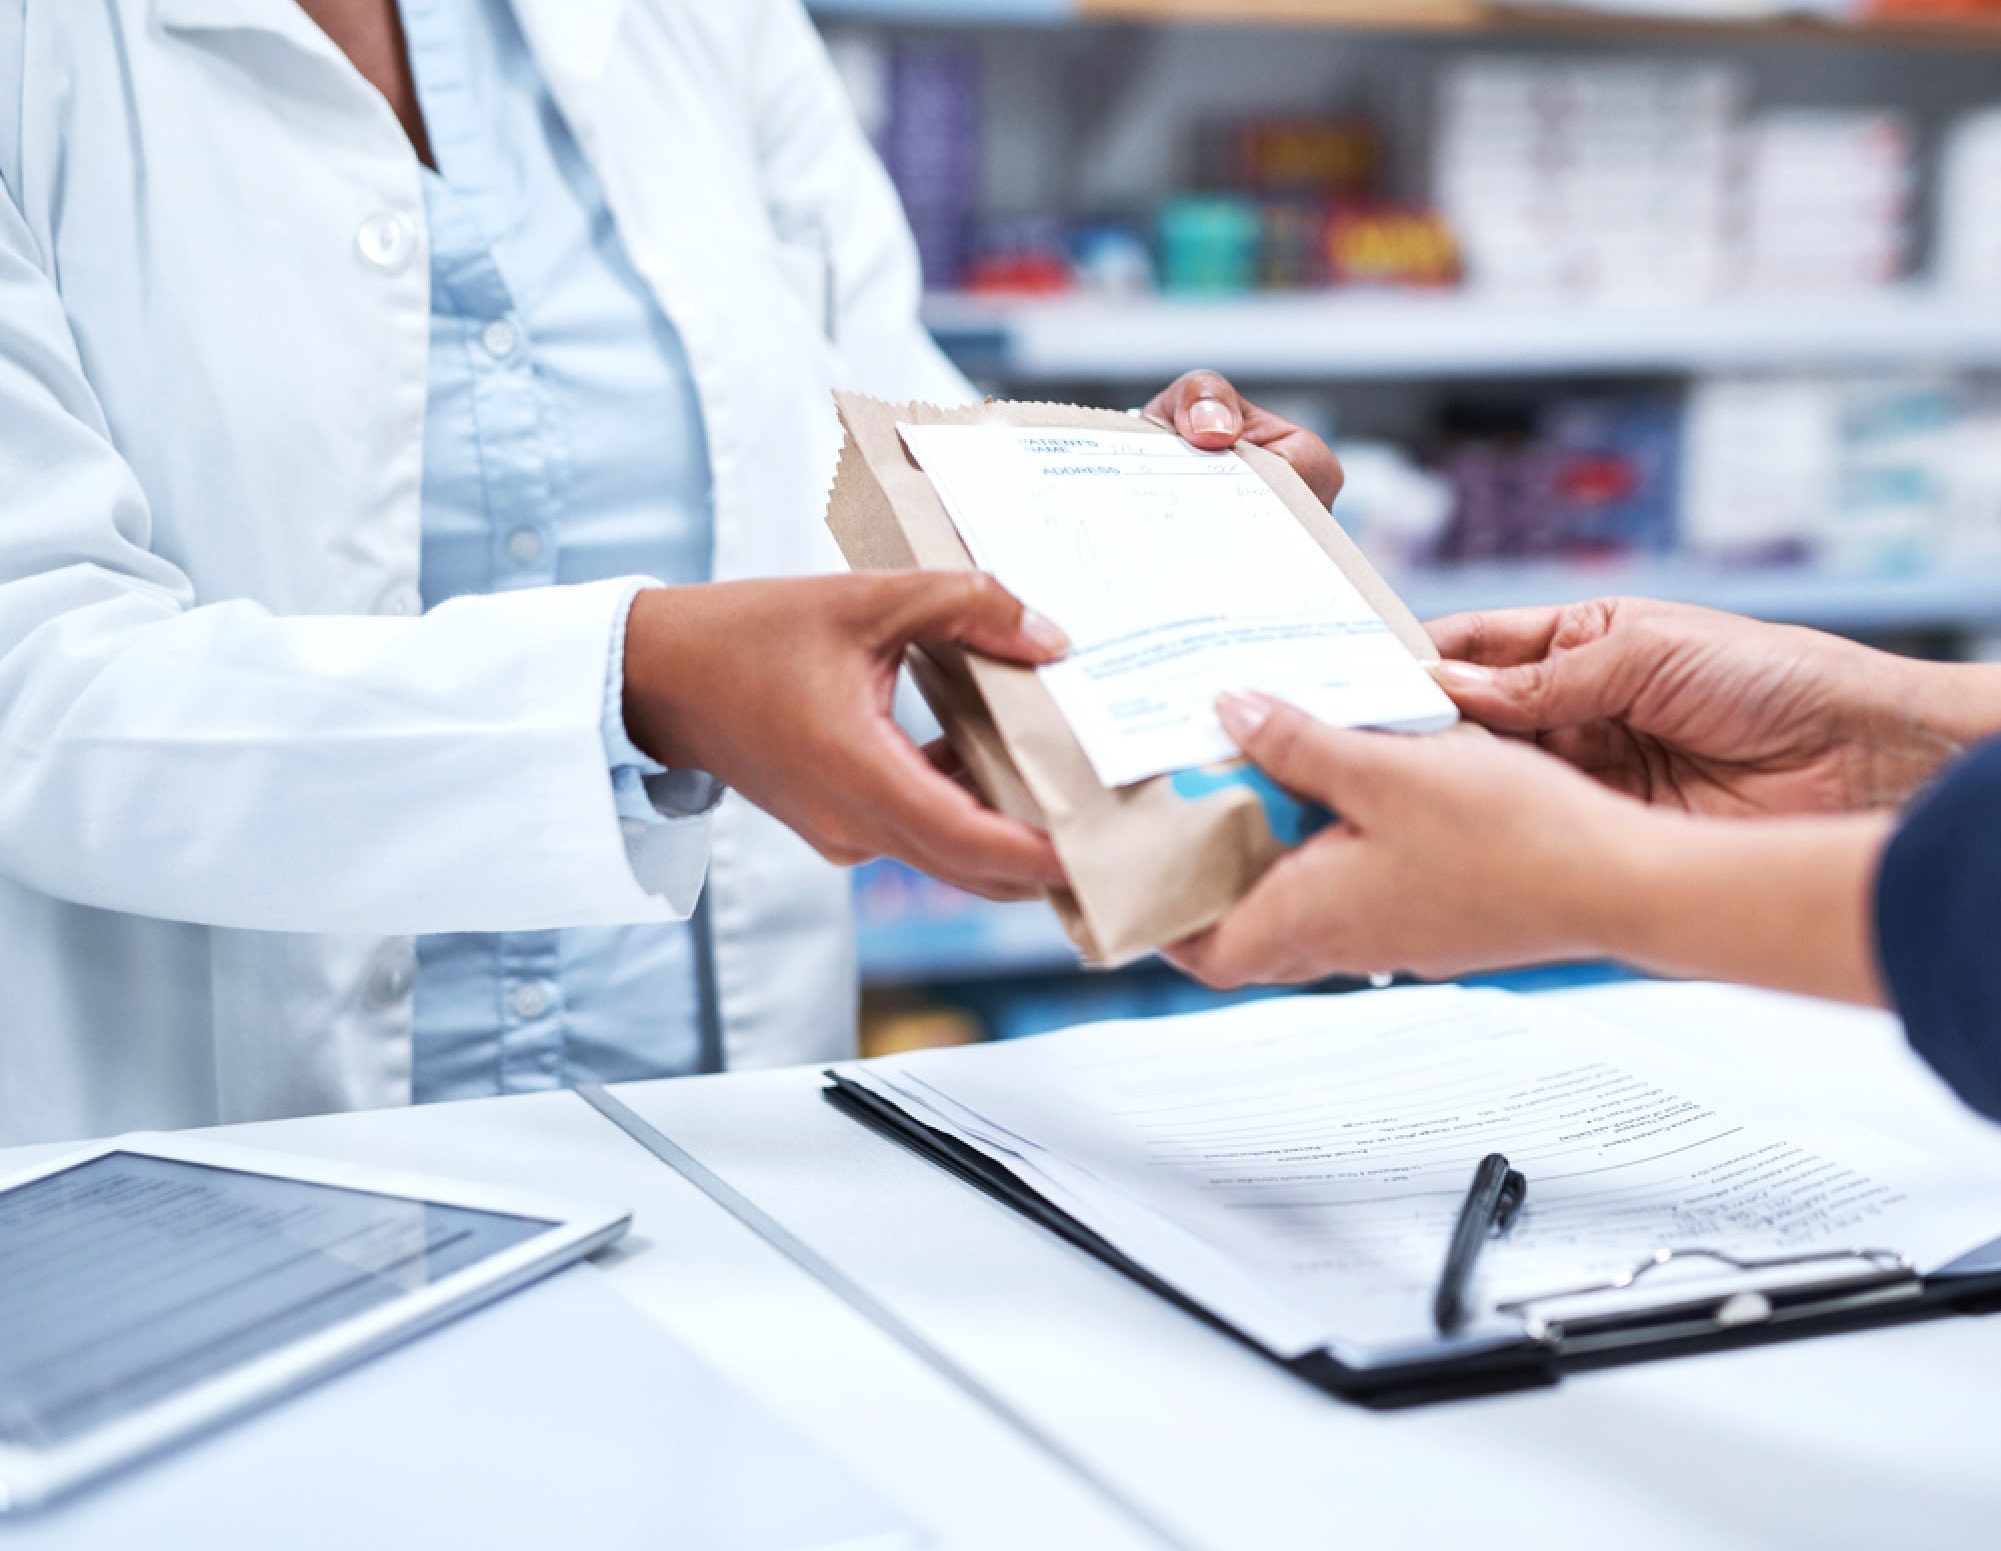 report-finds-pbms-are-increasingly-restricting-patient-access-to-their-medicines